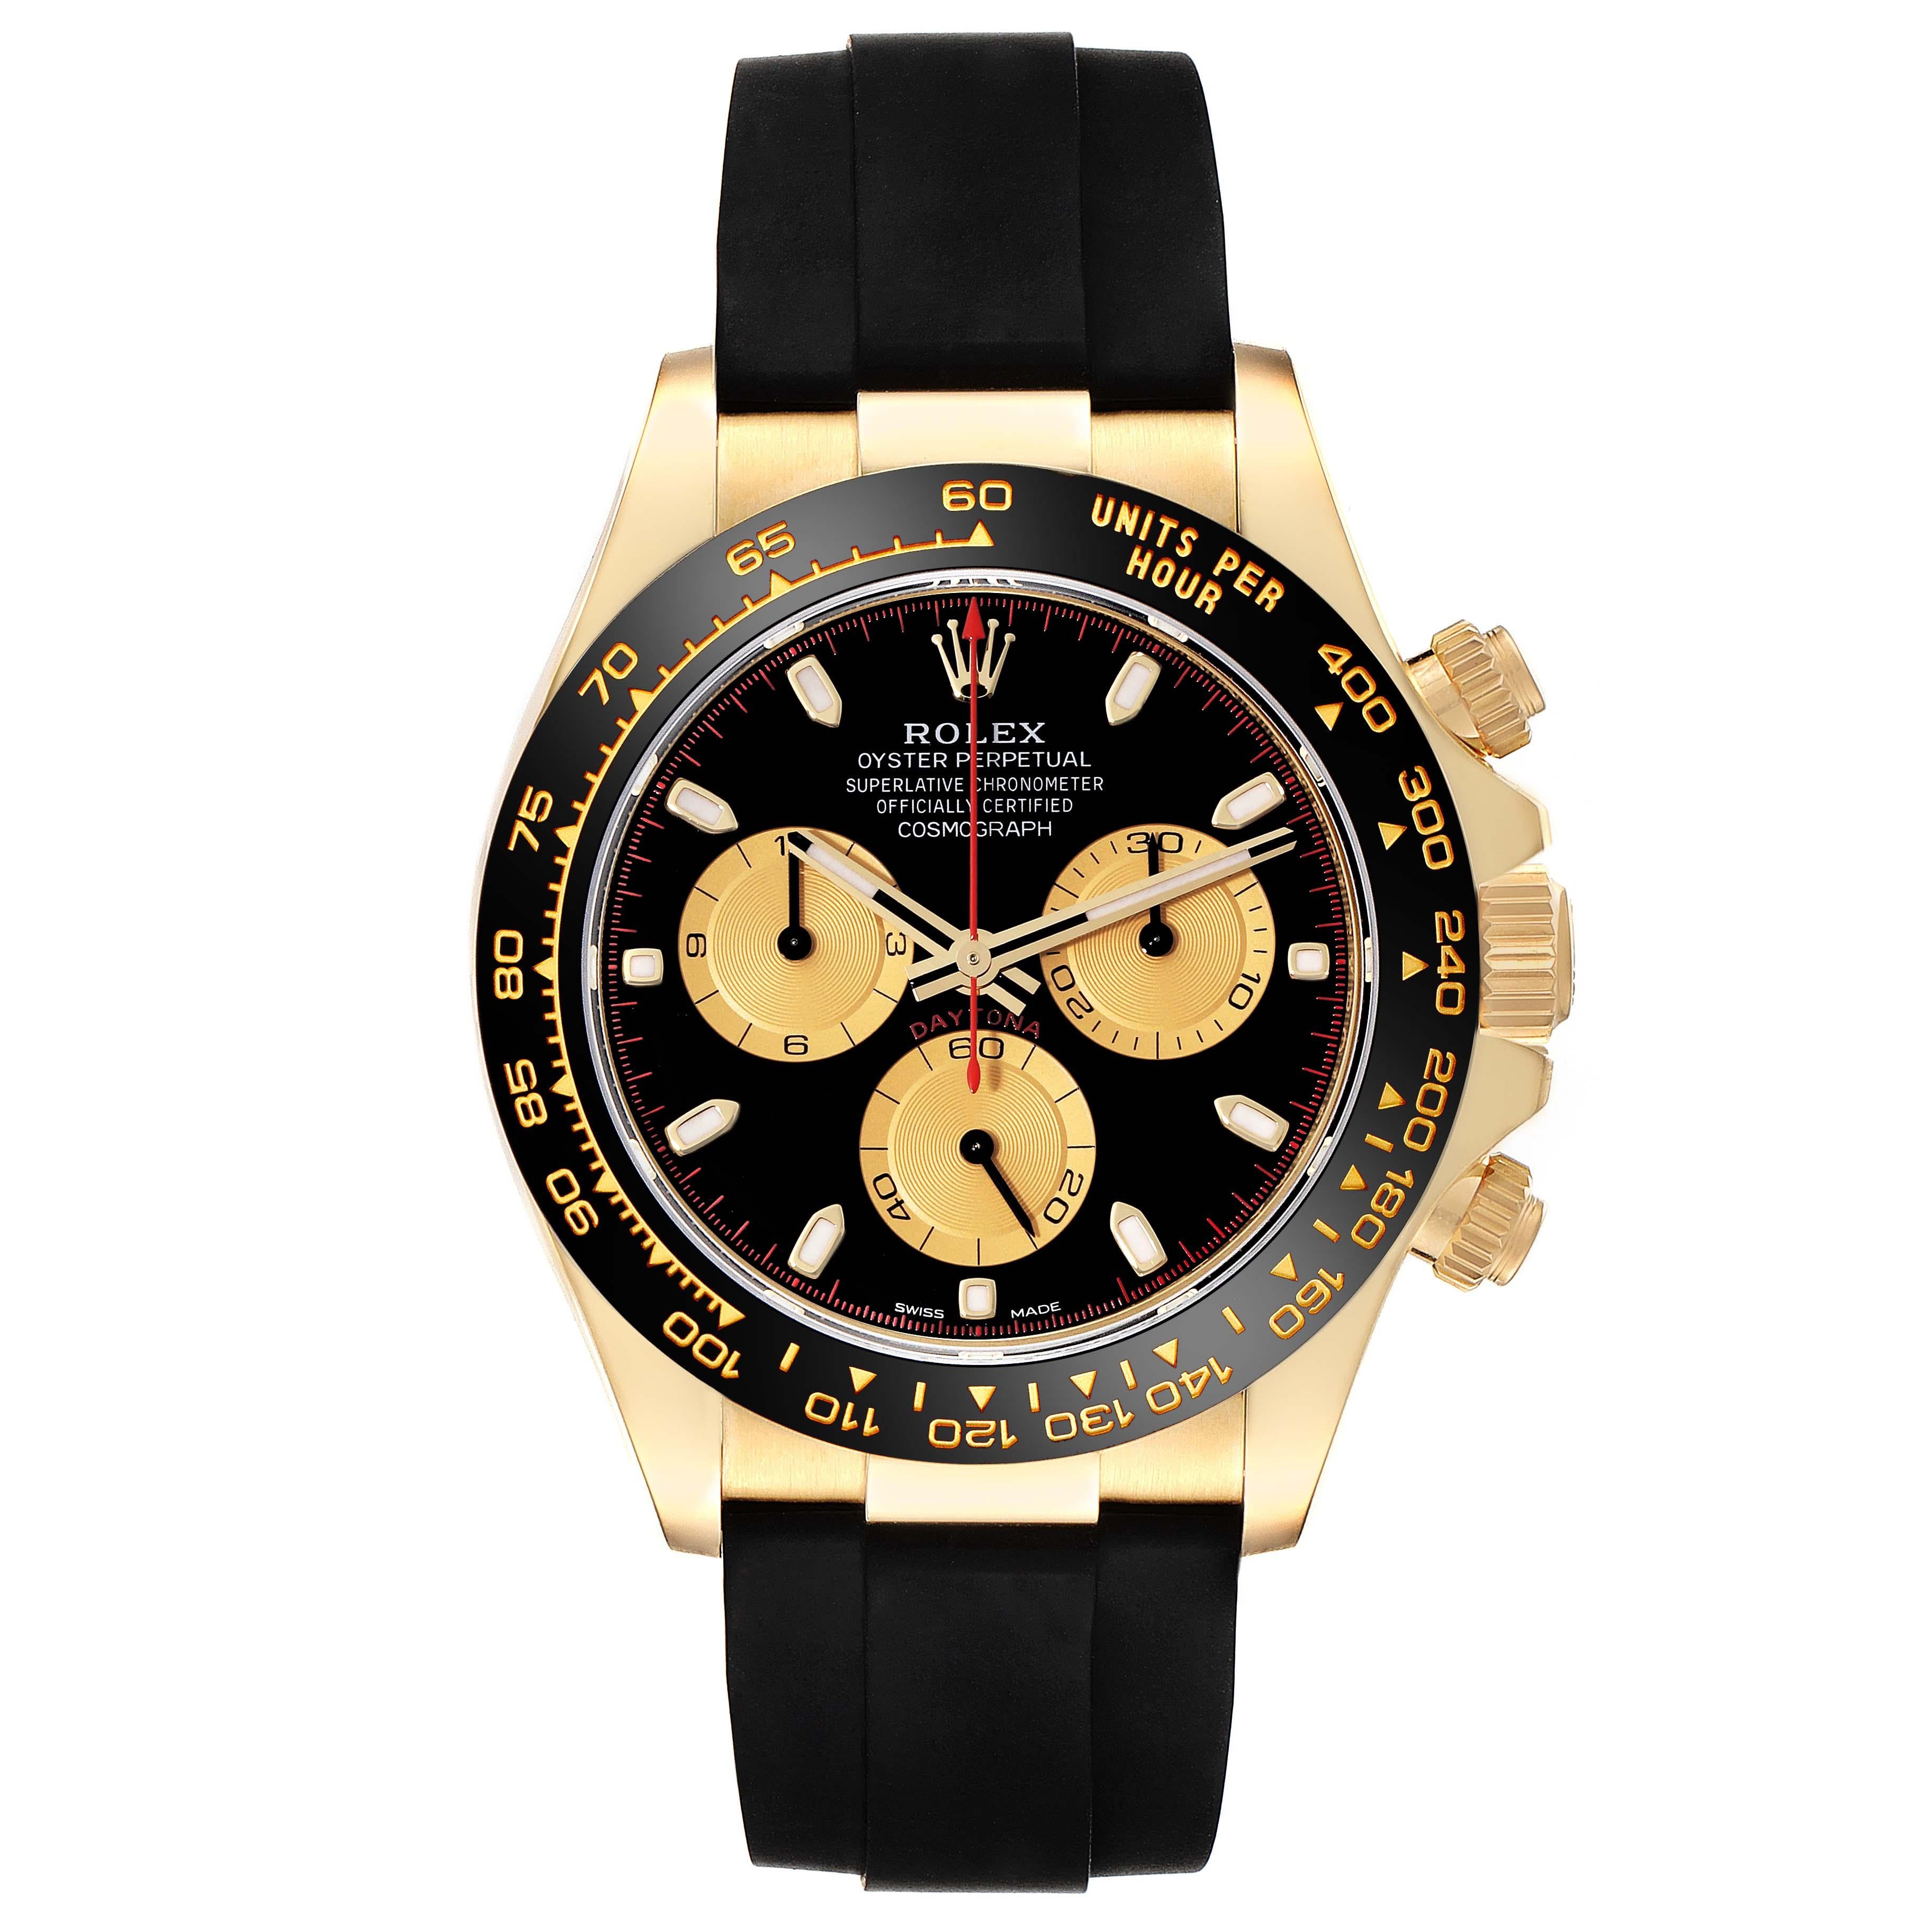 Rolex Daytona Yellow Gold Black Dial Ceramic Bezel Mens Watch 116518 Box Card. Officially certified chronometer automatic self-winding movement. Chronograph function. 18K yellow gold case 40.0 mm in diameter.  Special screw-down push buttons. Black